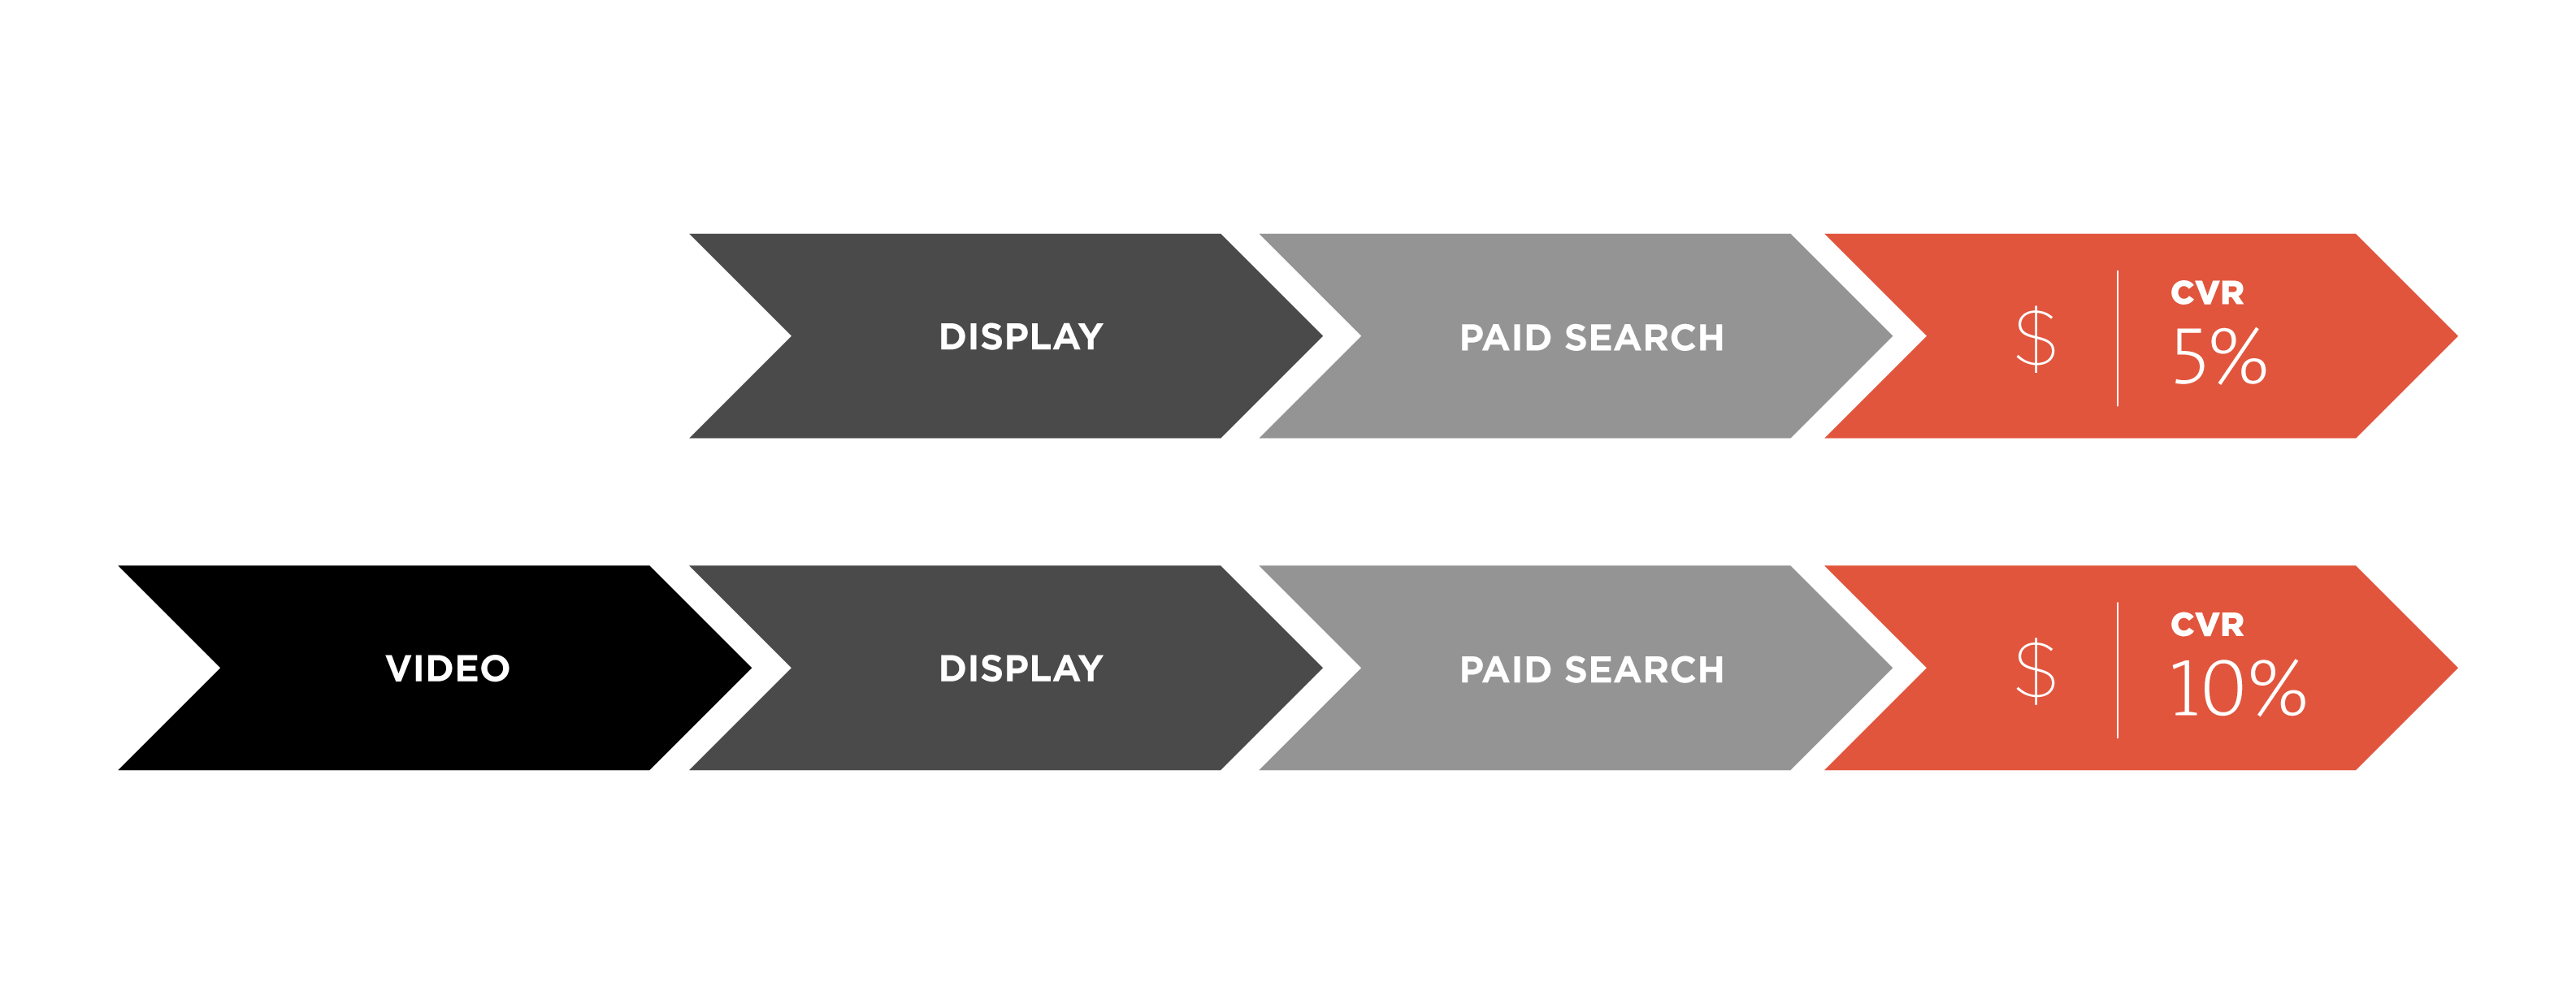 Chart shows ad channels display and paid search and CVRs